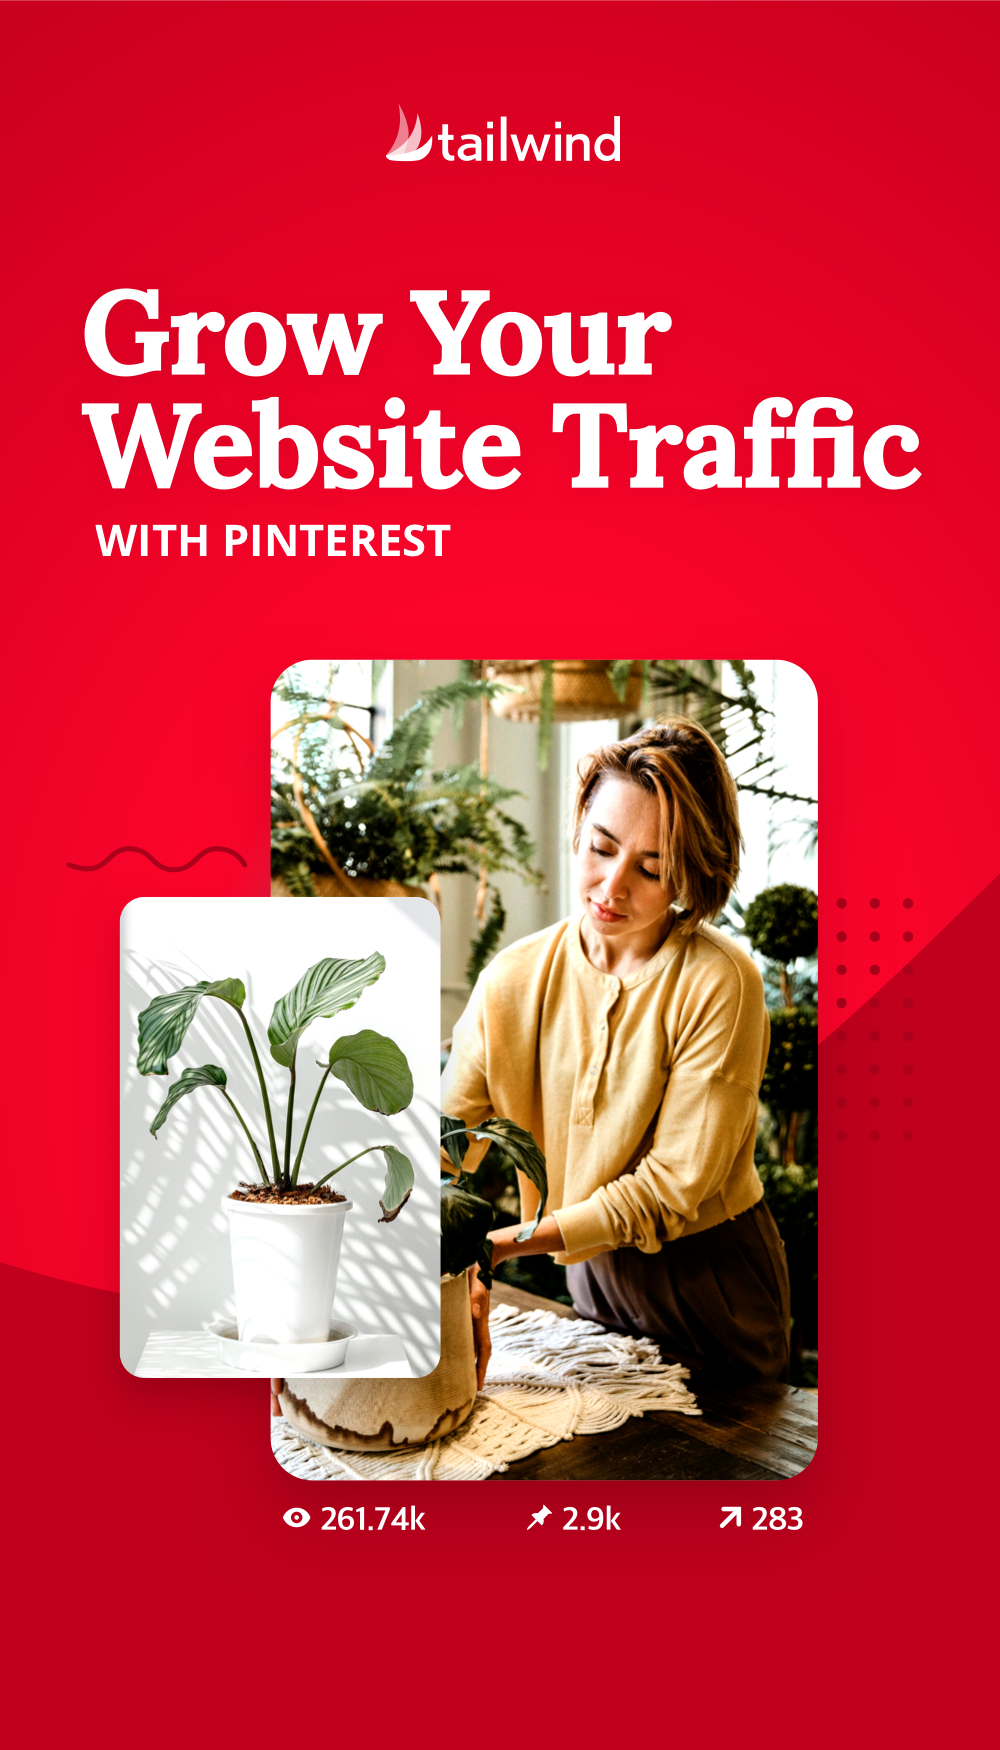 Skyrocket your website traffic with this downloadable guide to organic Pinterest marketing! This simple guide is your no-fluff, no-jargon, no-kidding passport to substantial traffic growth from Pinterest.